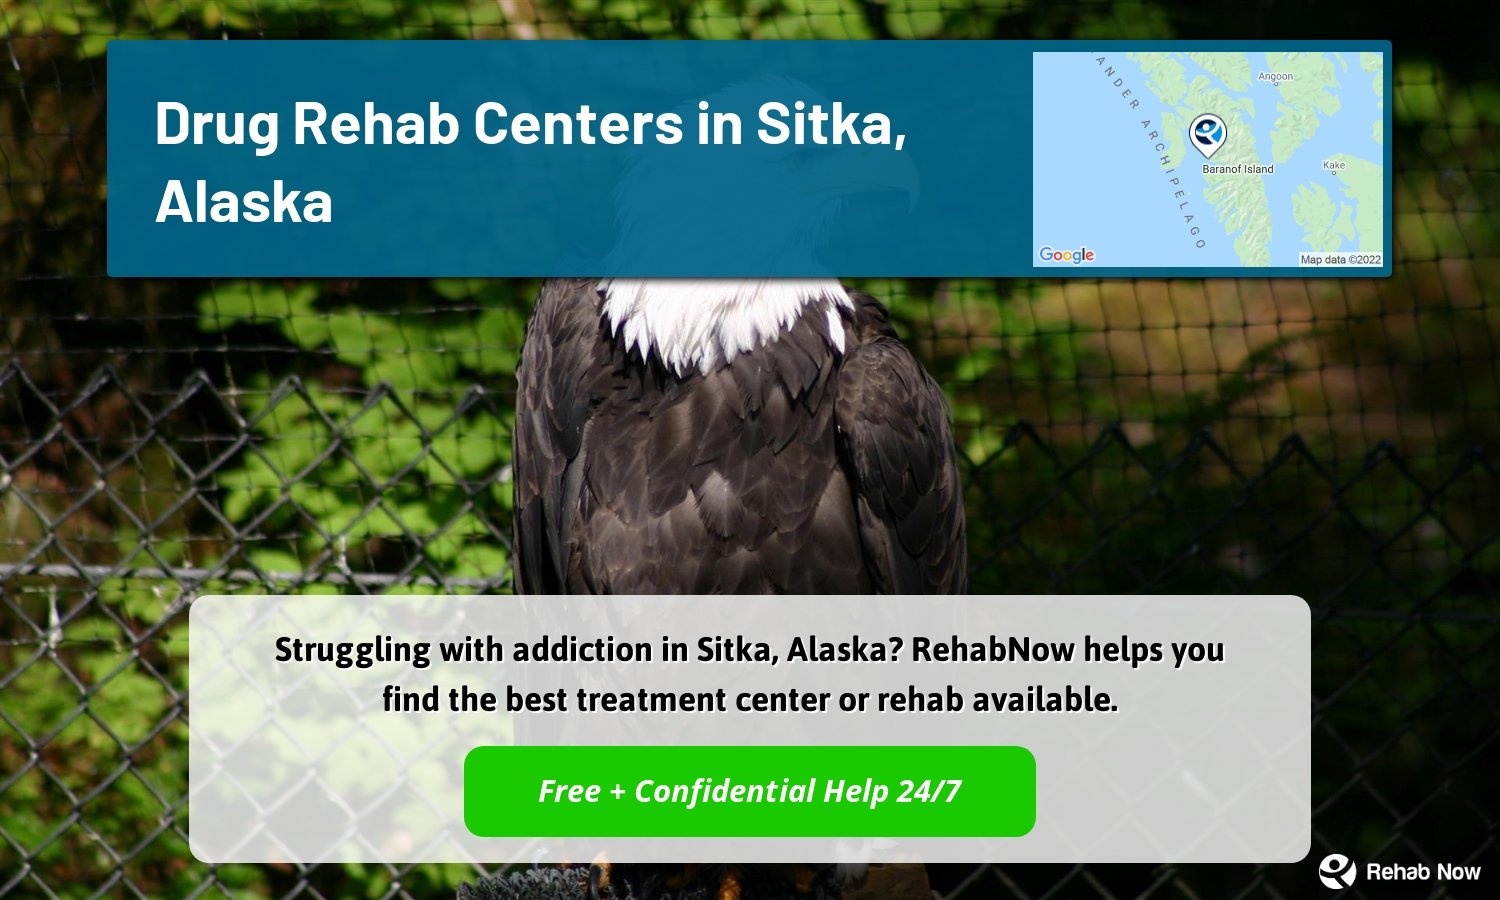 Struggling with addiction in Sitka, Alaska? RehabNow helps you find the best treatment center or rehab available.